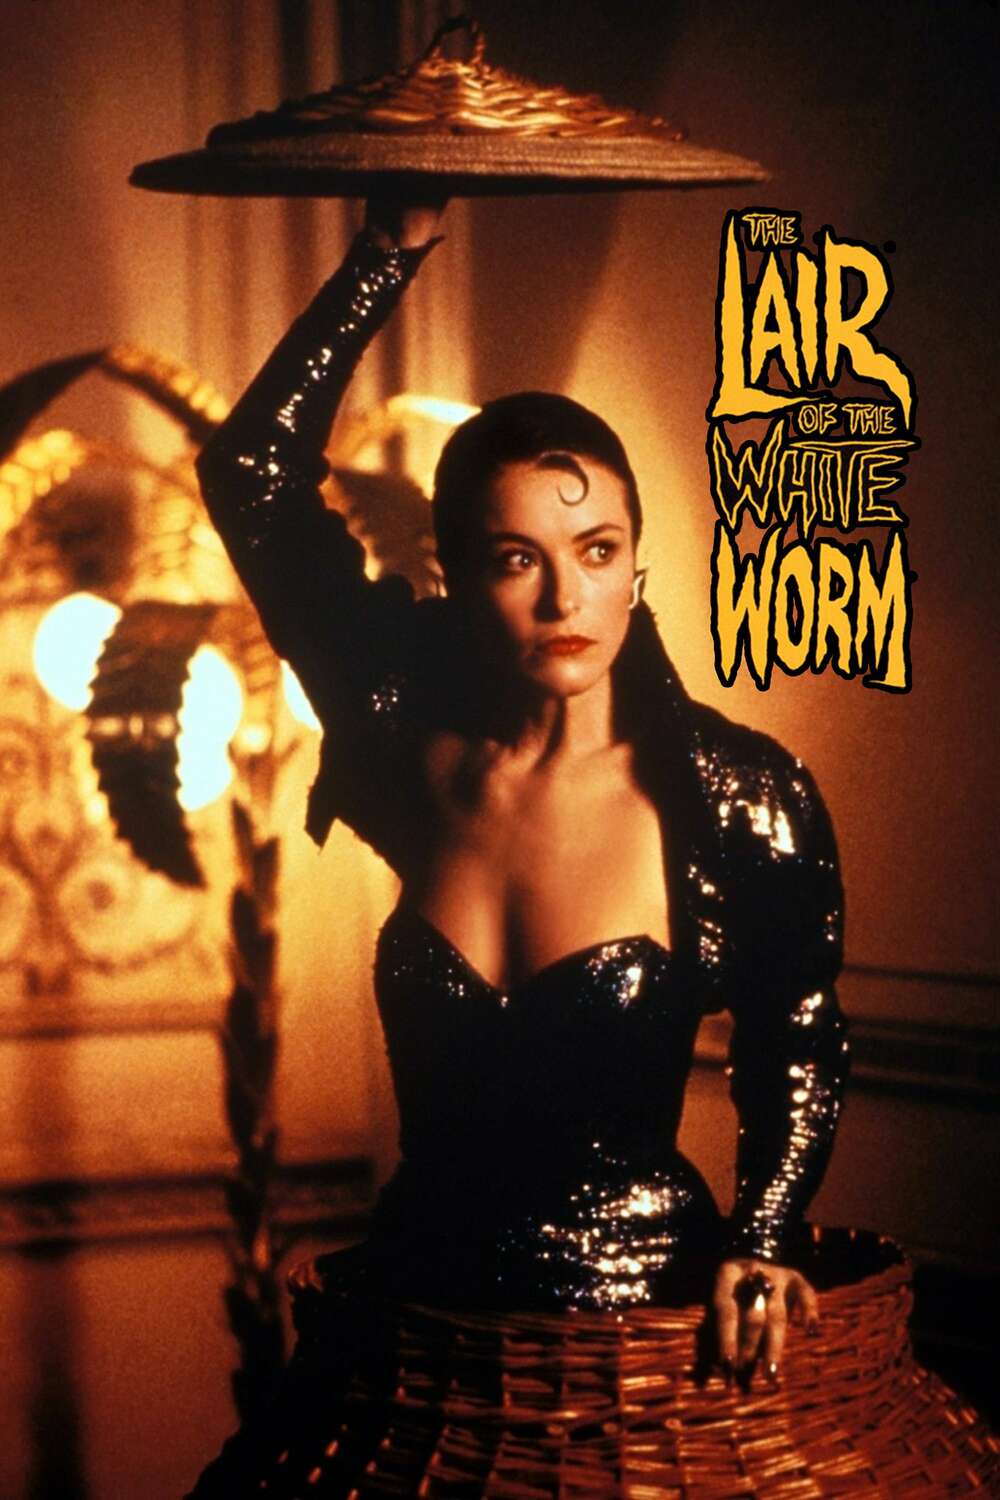 Lair of the White Worm film poster.